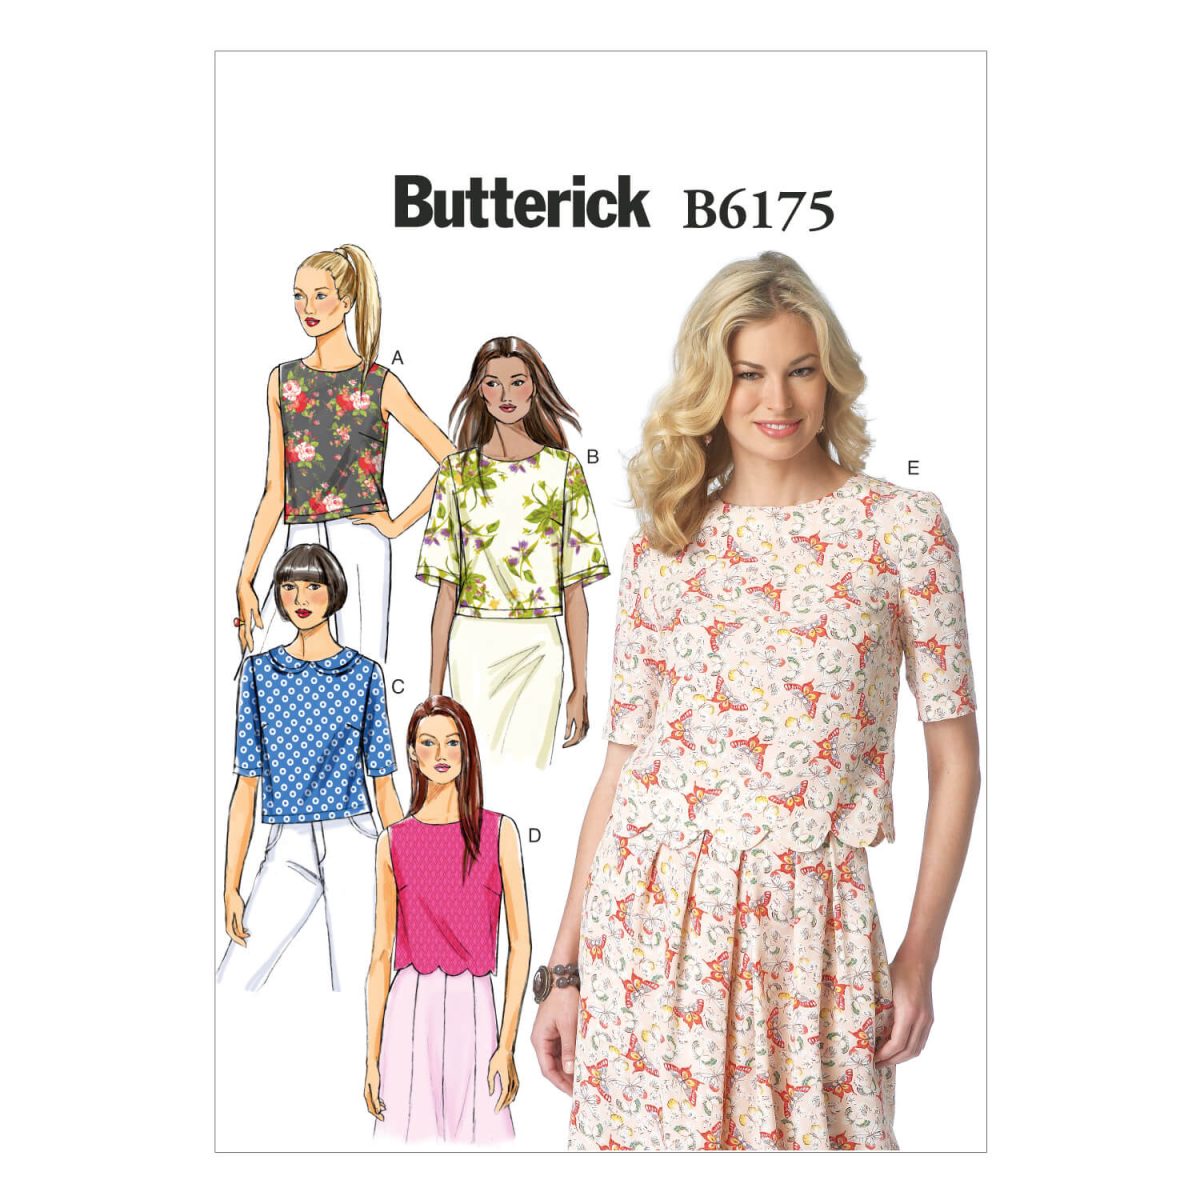 Butterick Sewing Pattern B6175 Misses' Top